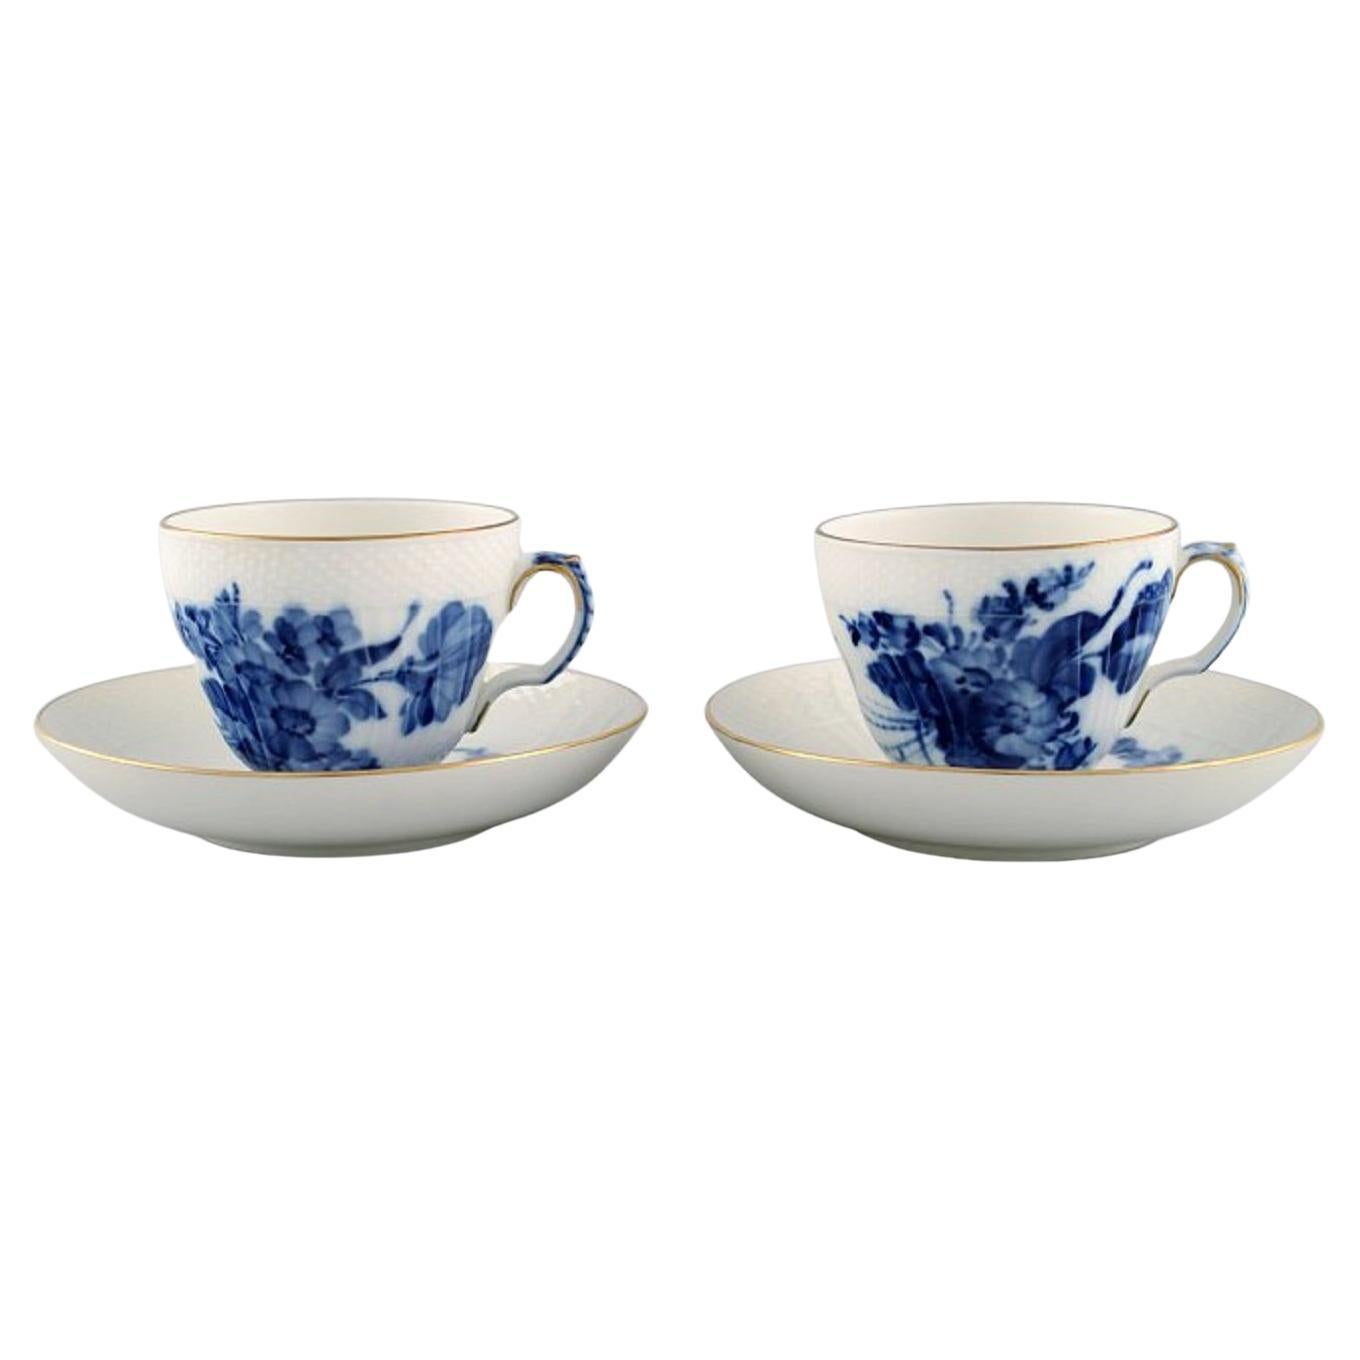 Two Royal Copenhagen Blue Flower Curved Coffee Cups with Saucers with Gold Edge